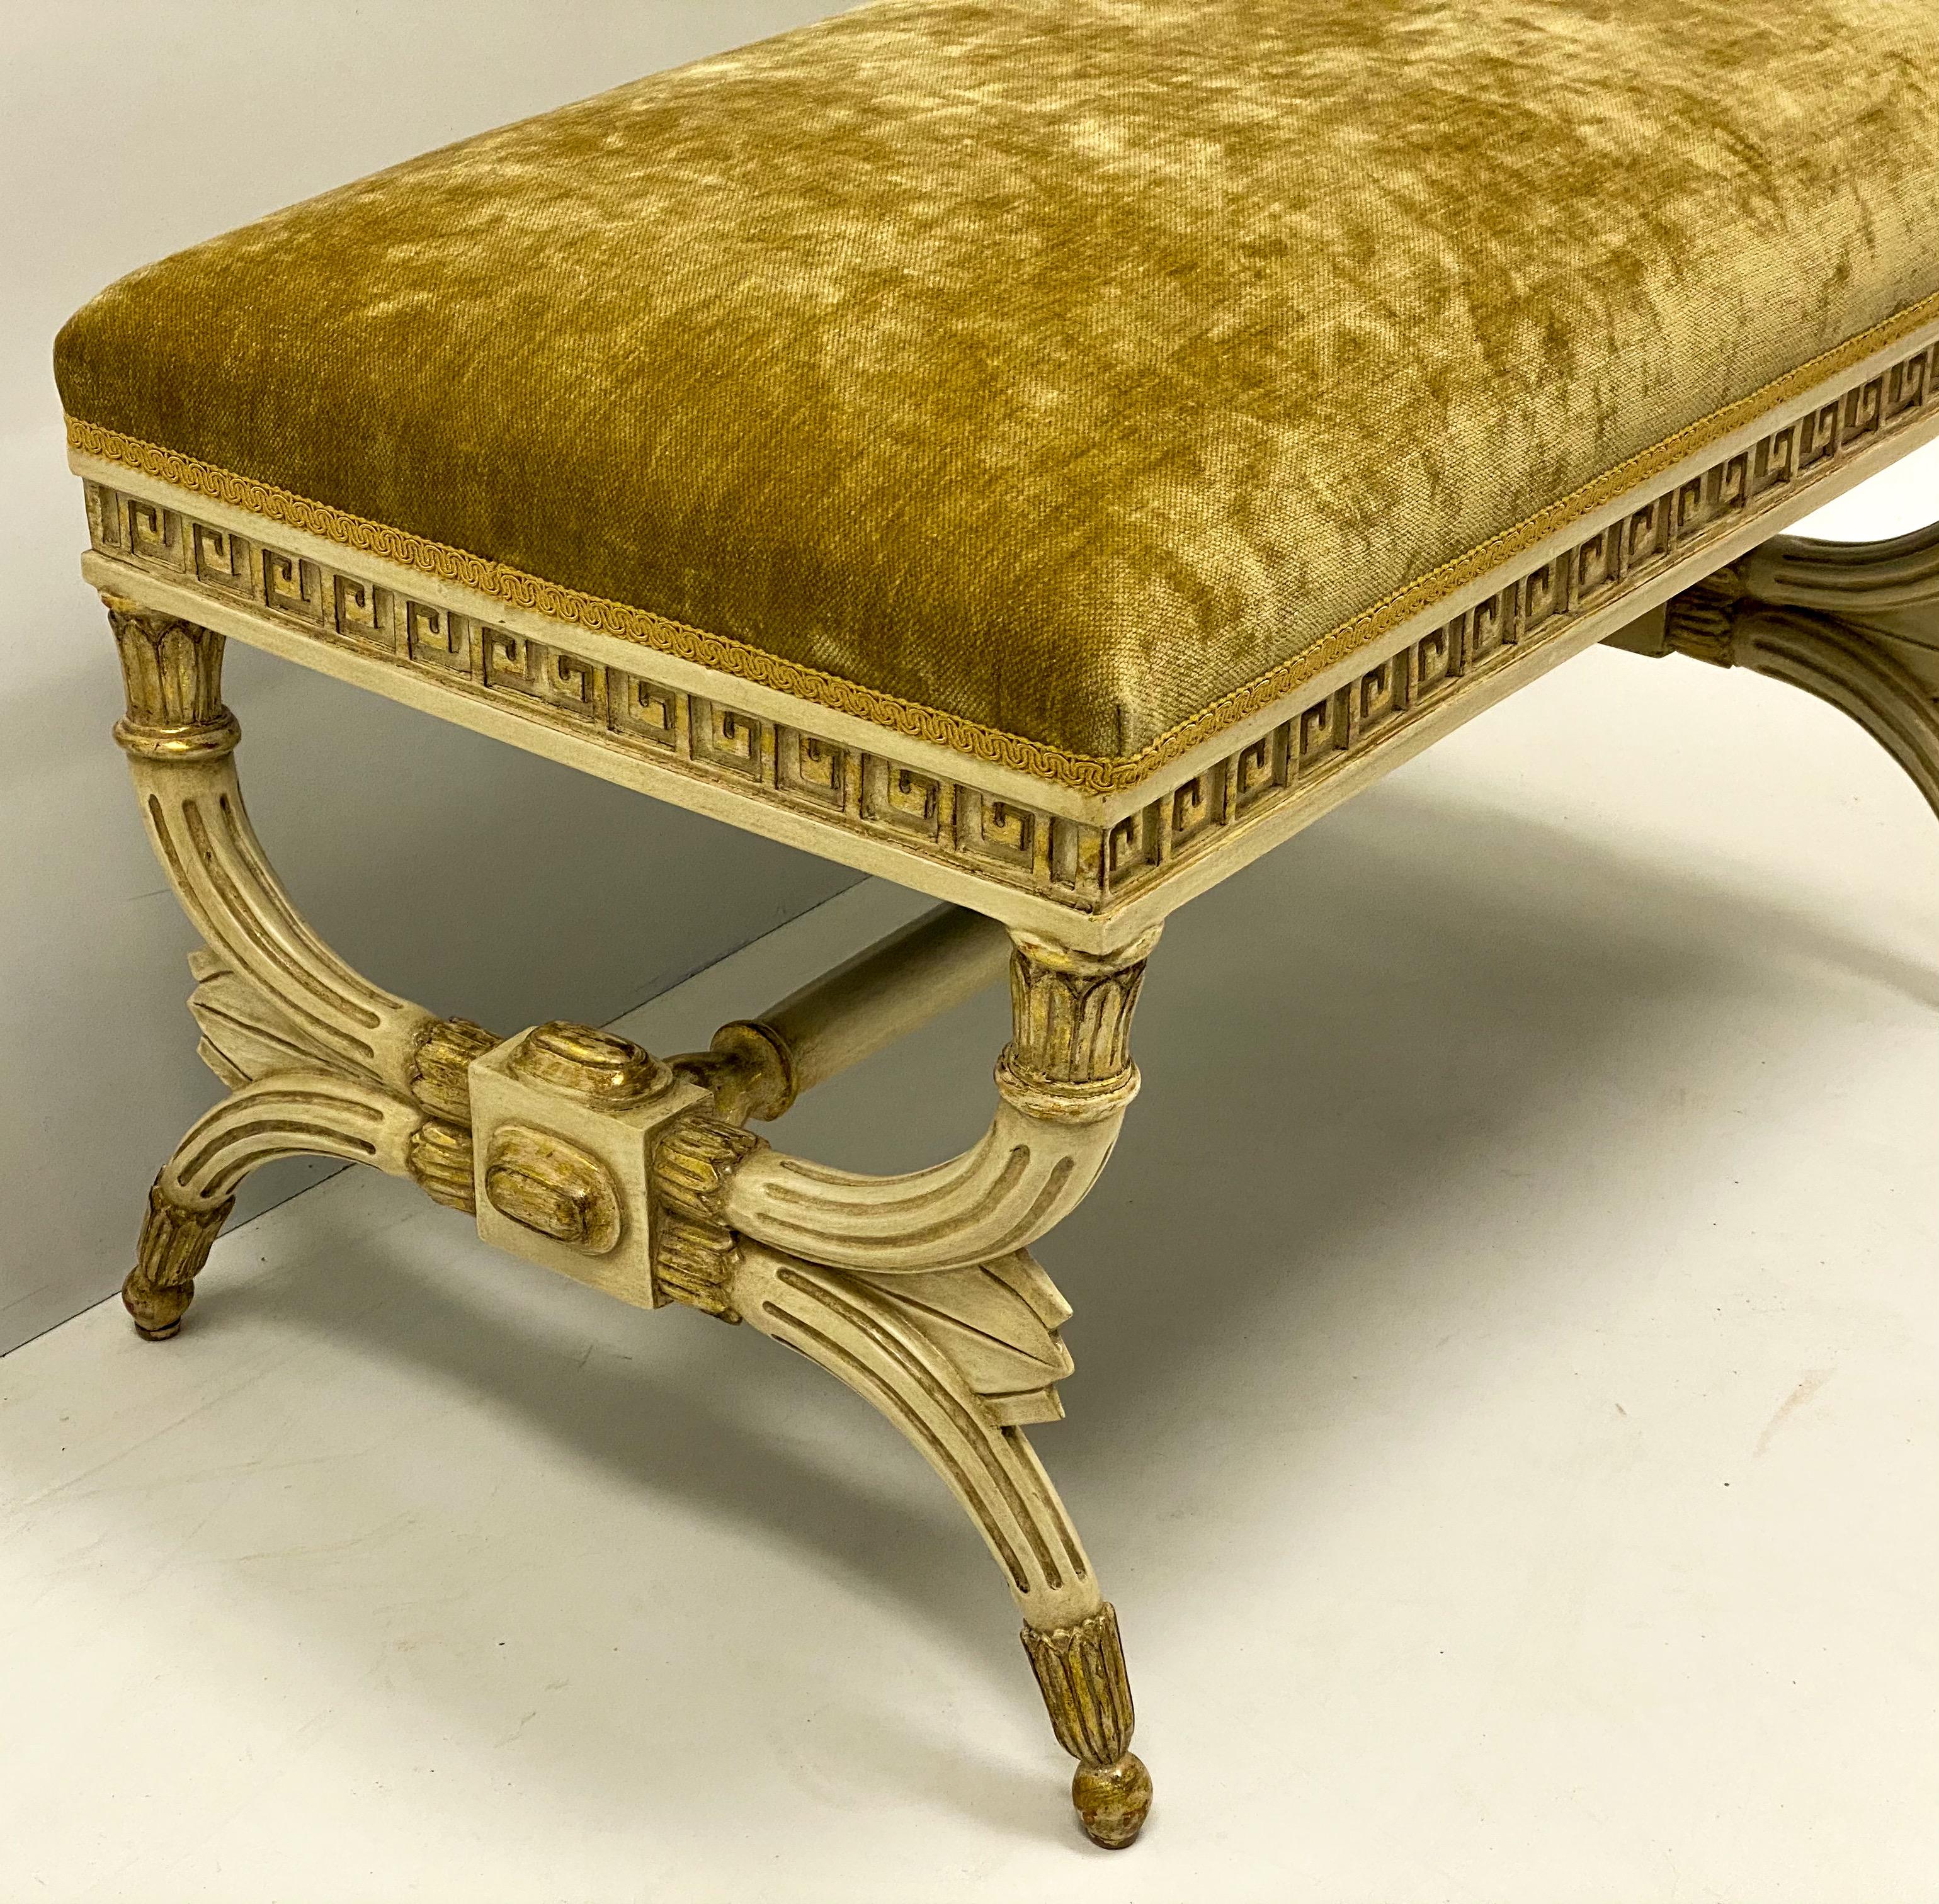 This is a mid-century Italian parcel gilt neo-classical style painted bench. The gold velvet is vintage and shows lite wear. The carved Greek key apron is wonderful. It is unmarked.